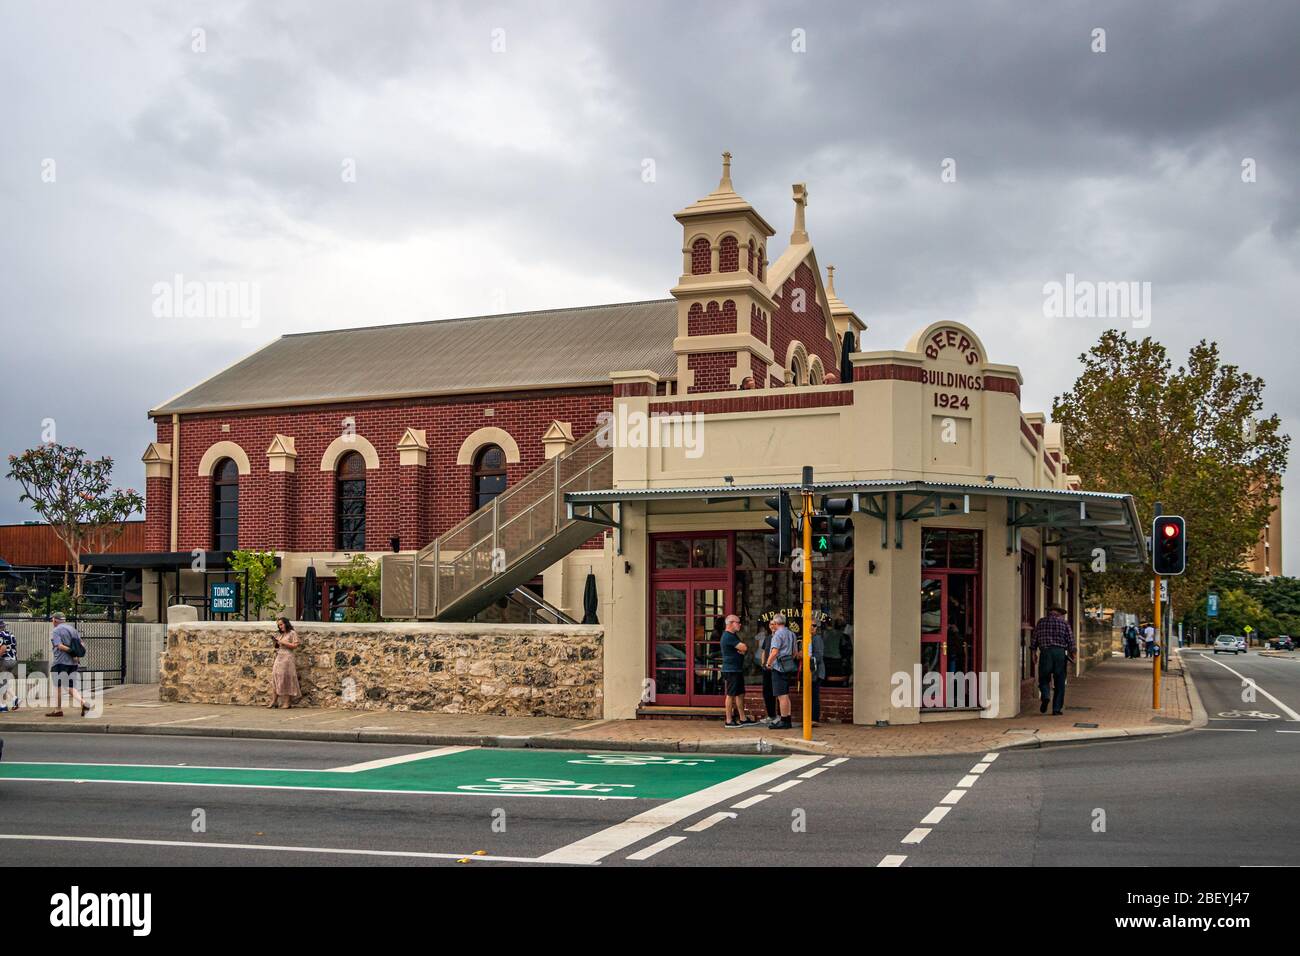 The old Beers building 1924 at the city center of Fermantle. Australia. Stock Photo